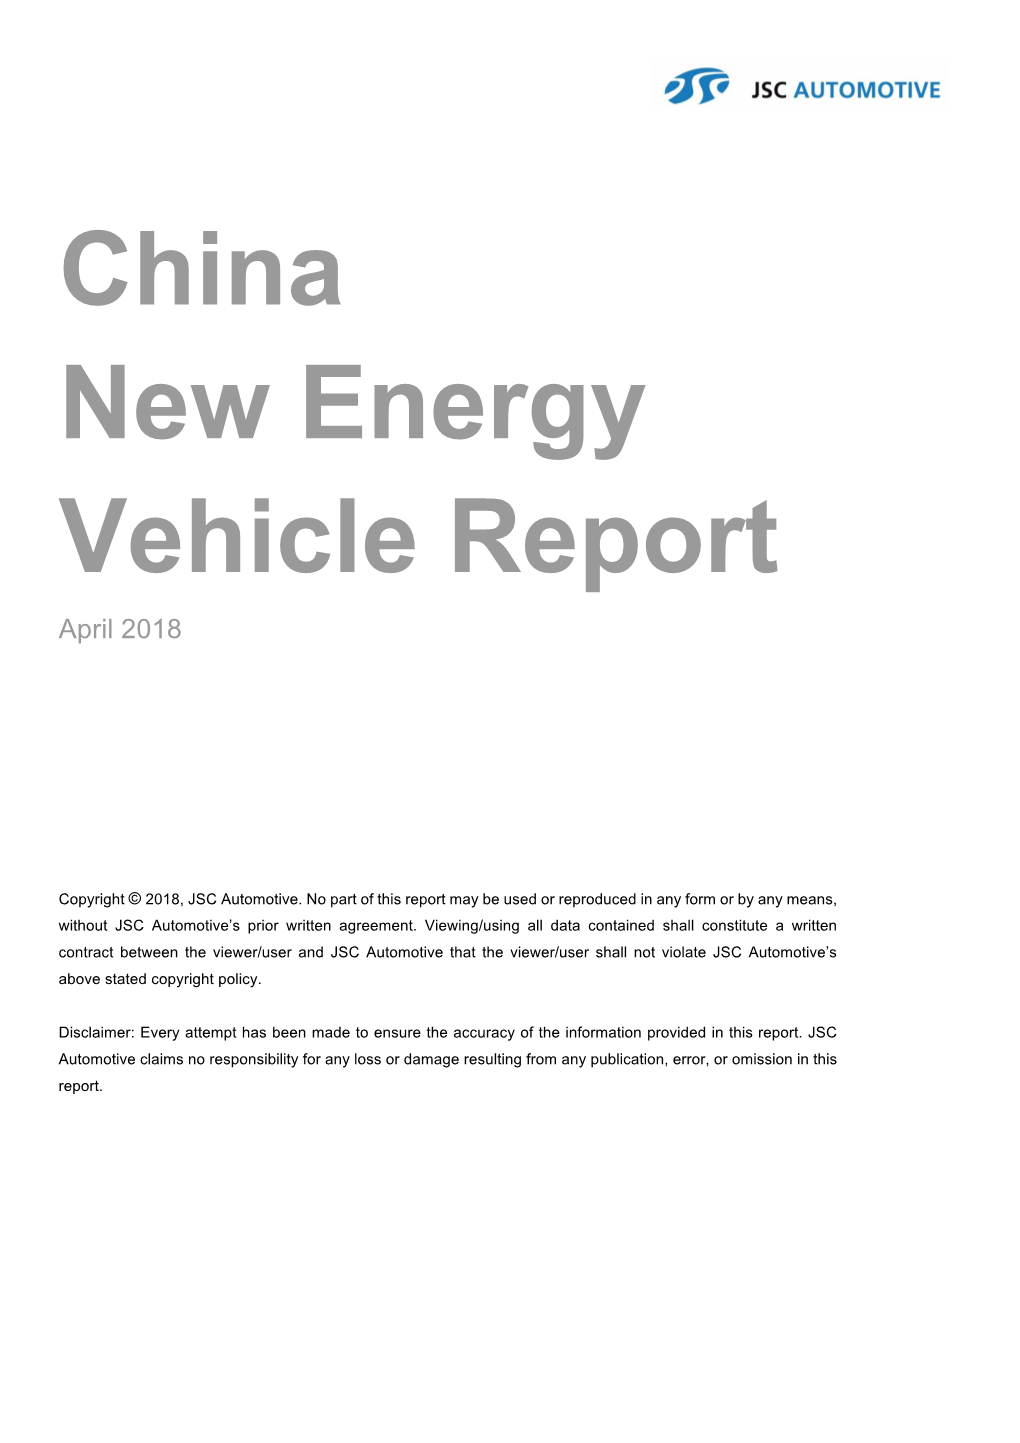 China New Energy Vehicle Report April 2018